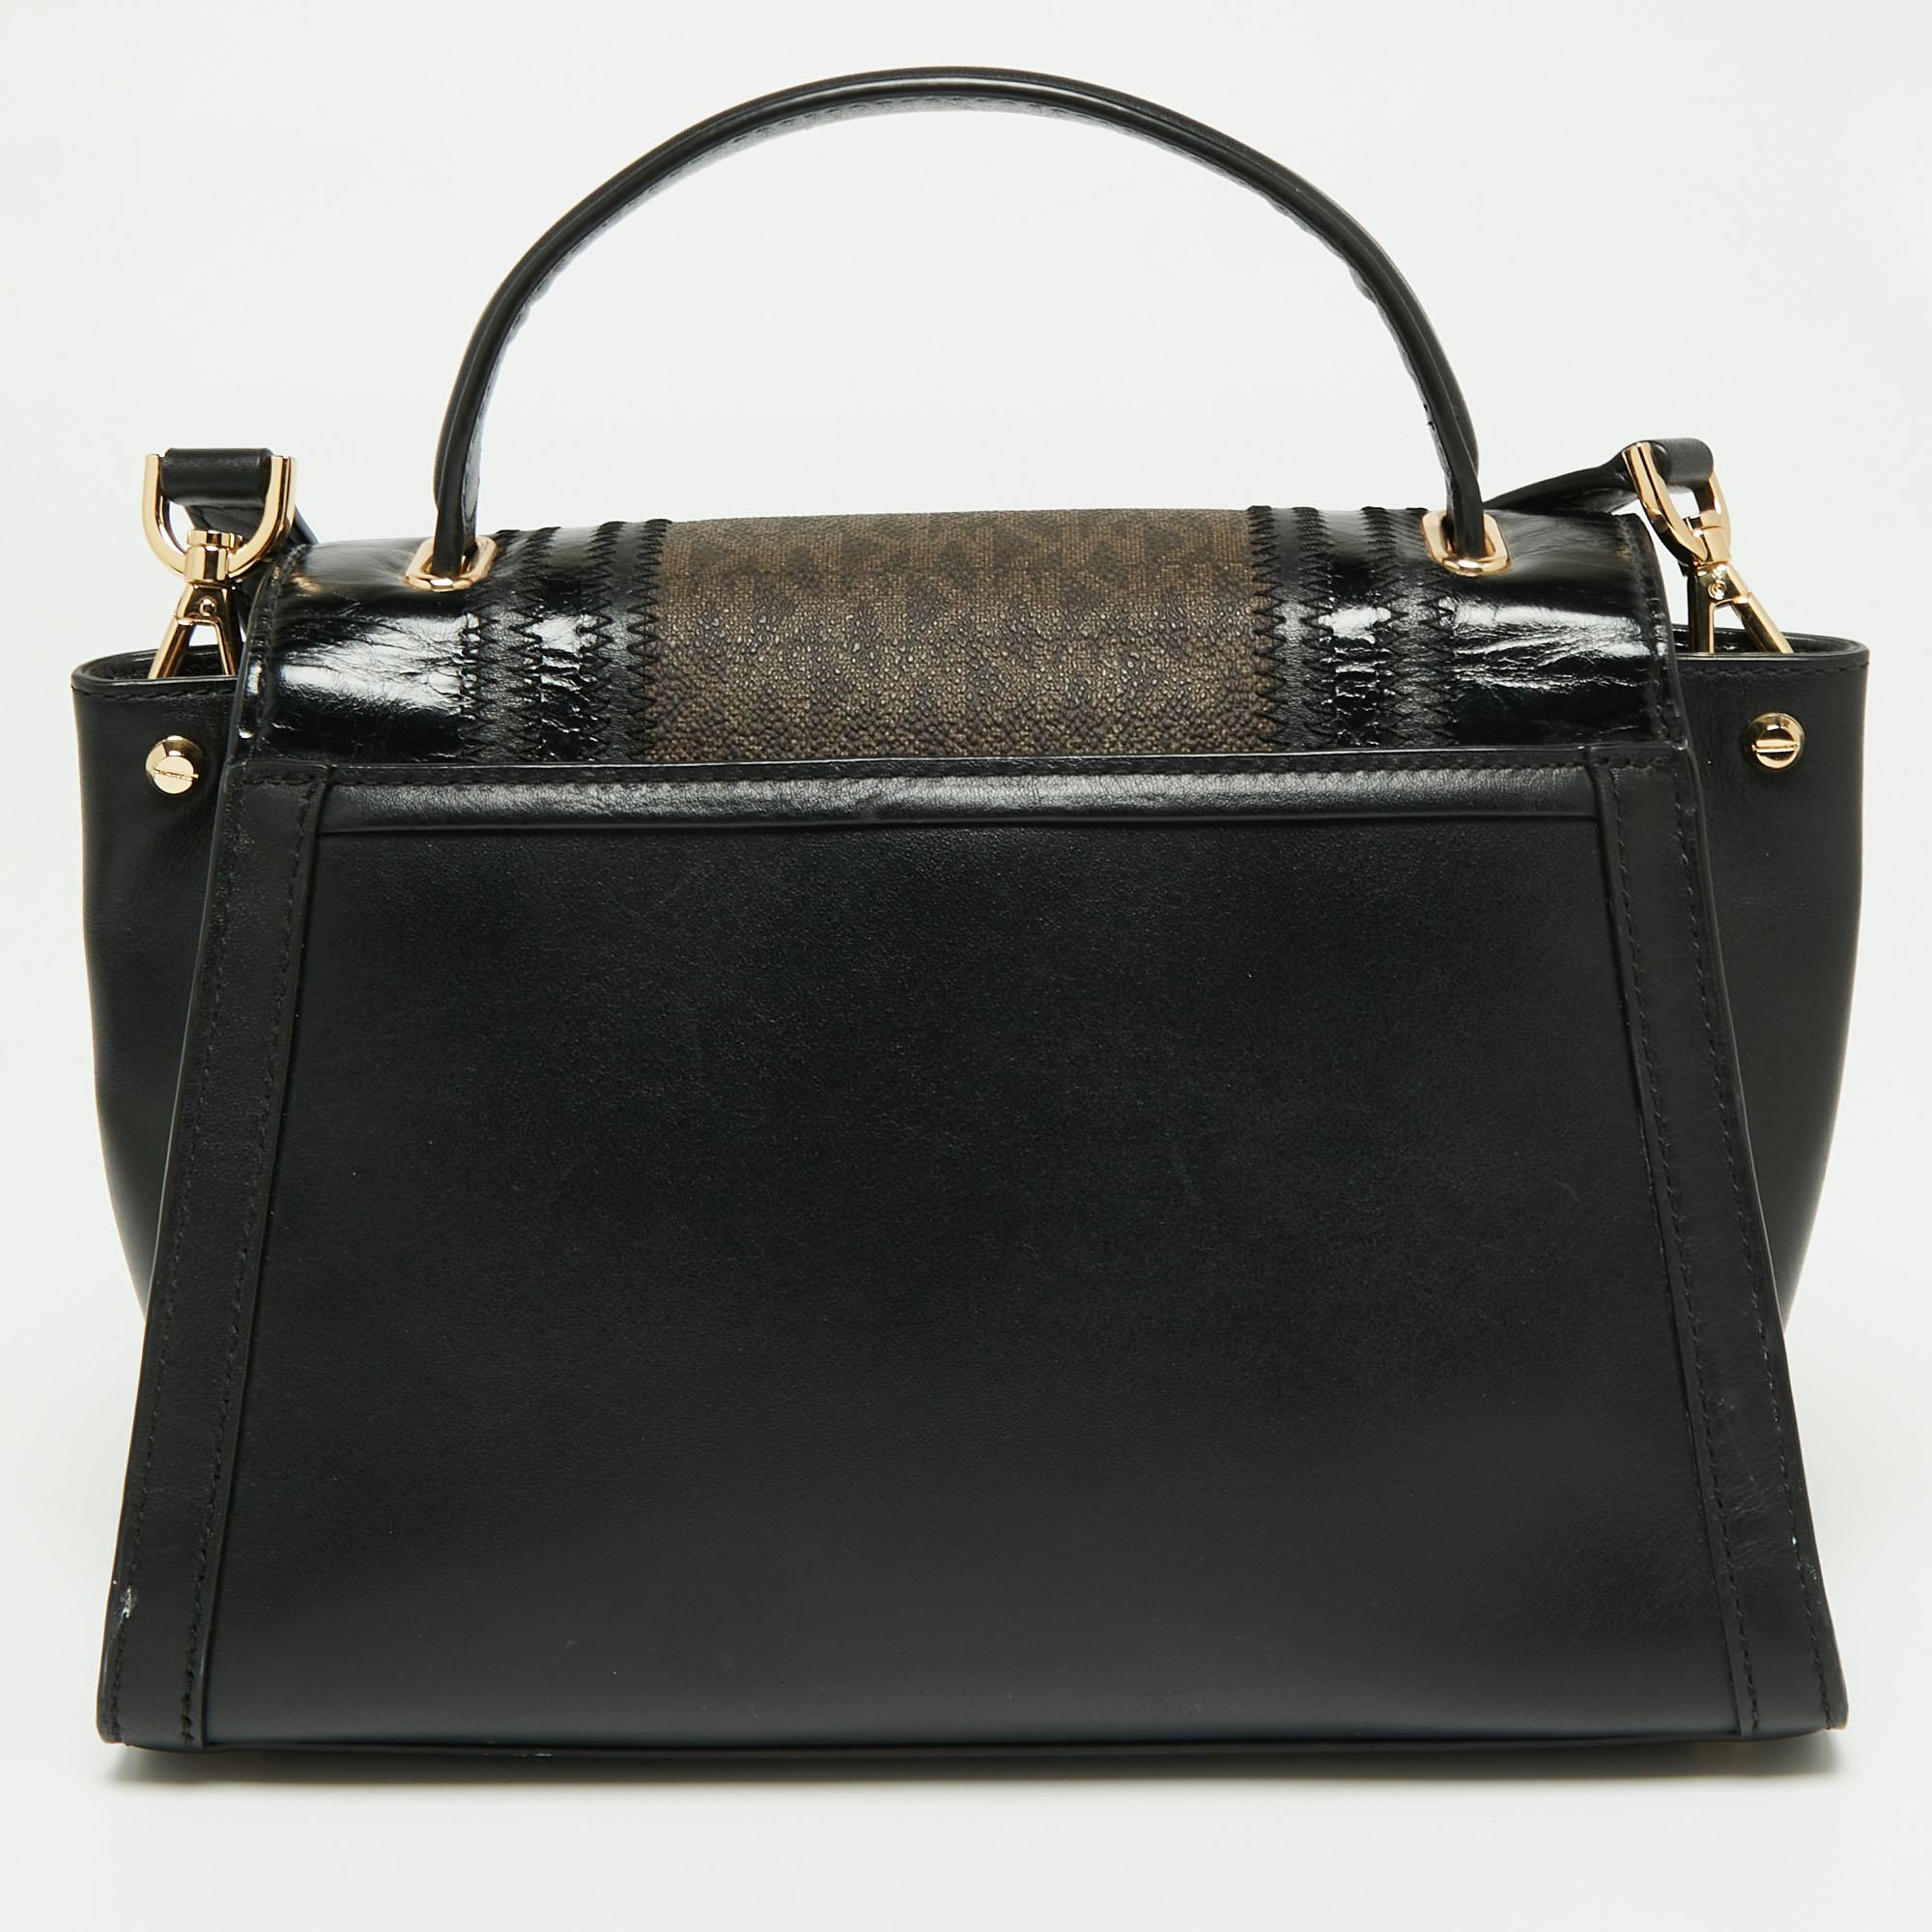 Beautified with gold-tone accents and a structured silhouette, this Michael Kors Whitney bag is an ideal option for your next outing. It comes crafted from the signature coated canvas and leather and exhibits the brand signature on the front, dual